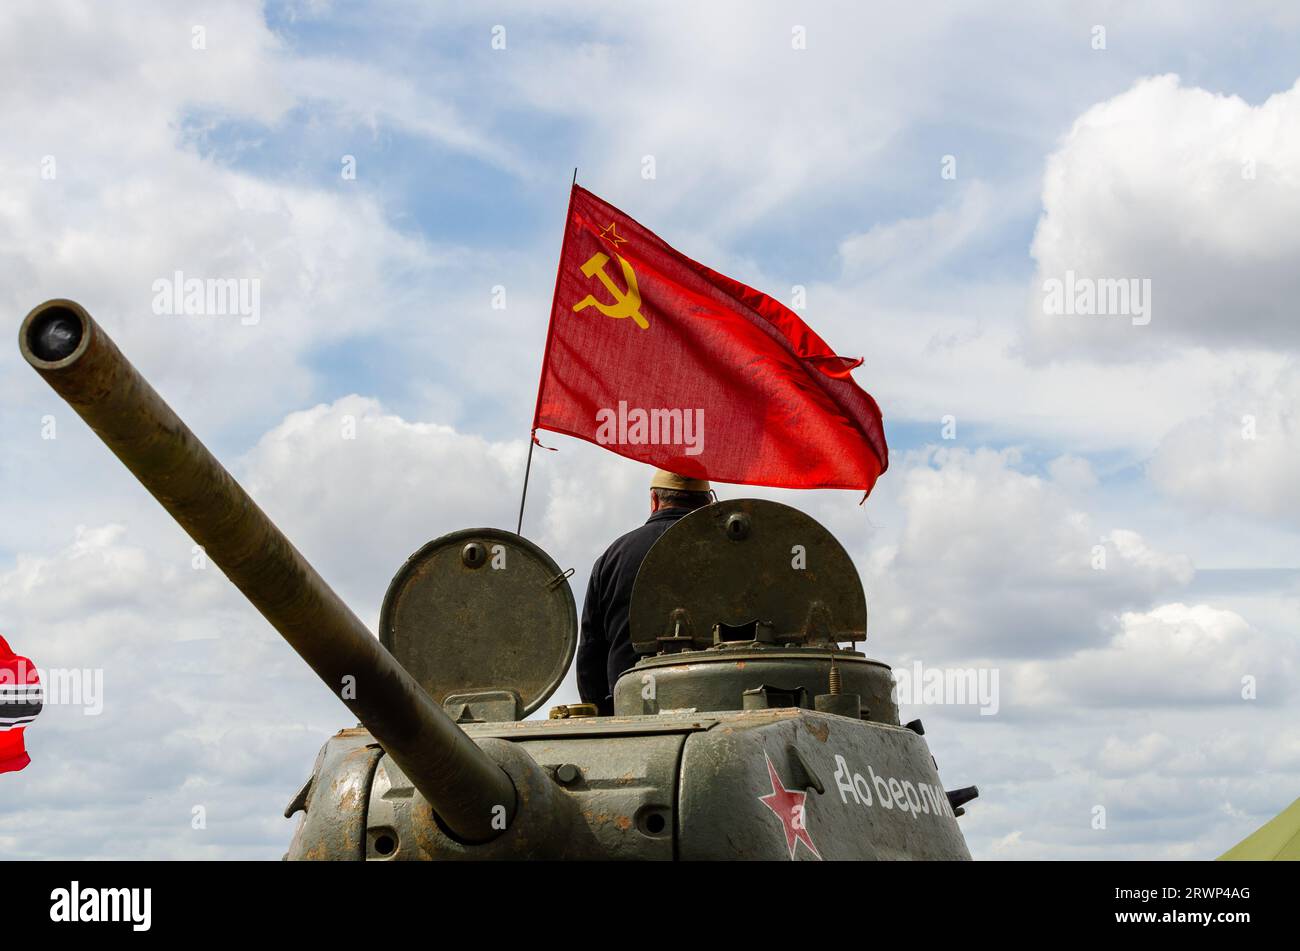 Russian tank flying the hammer and sickle red flag. Second World War T-34 tank at a military re-enactment event in Essex, UK. Red flag flying Stock Photo